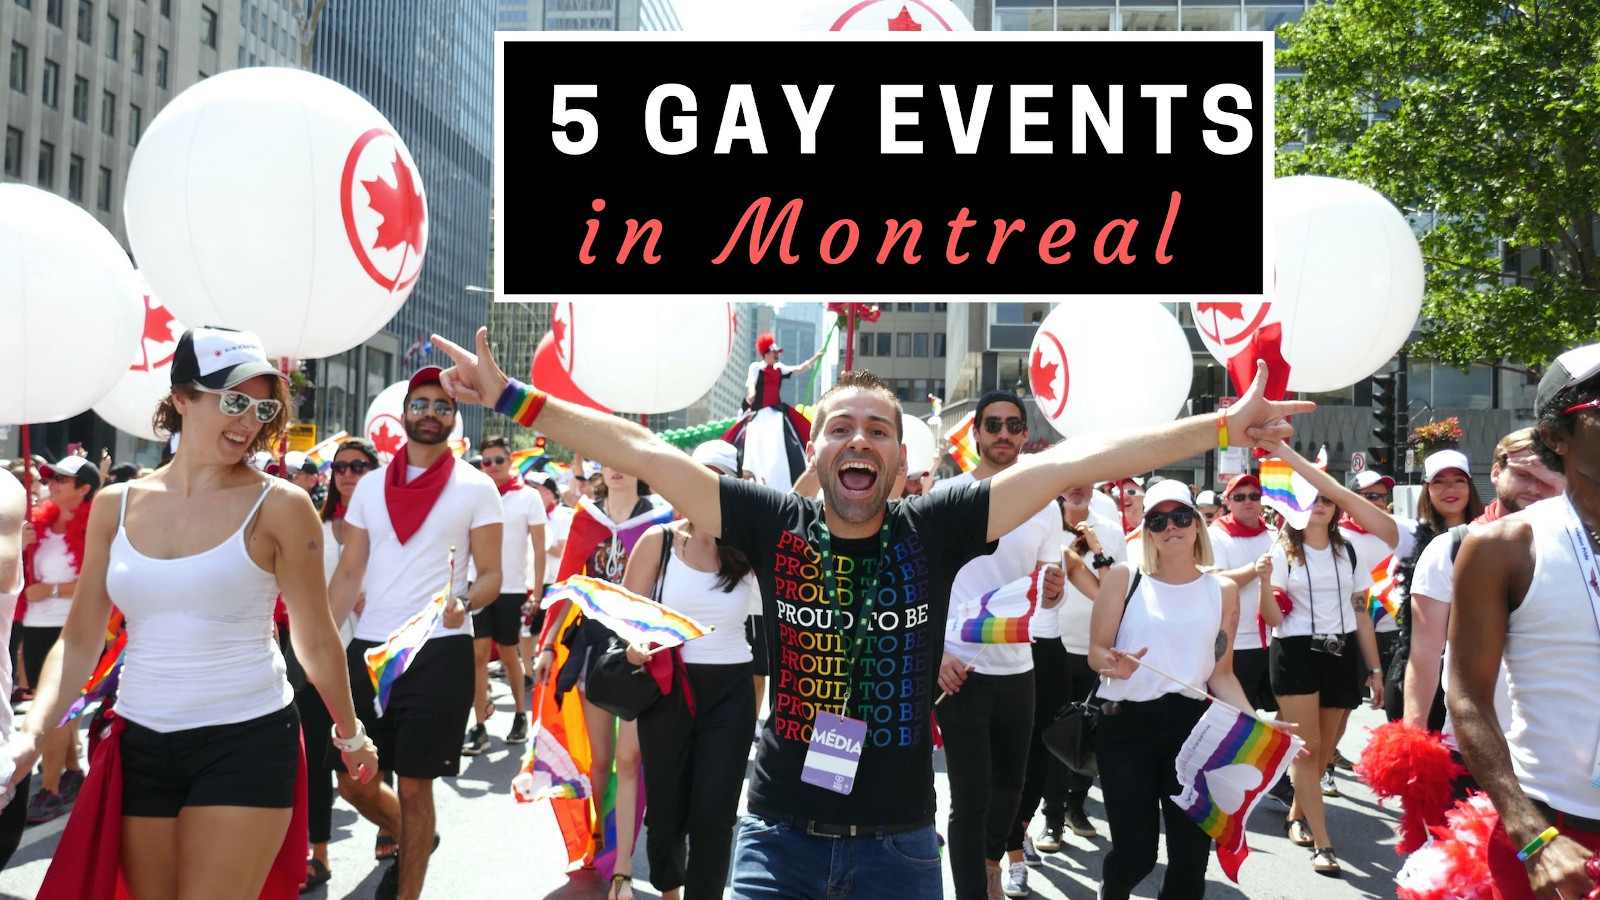 5 Gay events in Montreal not to miss